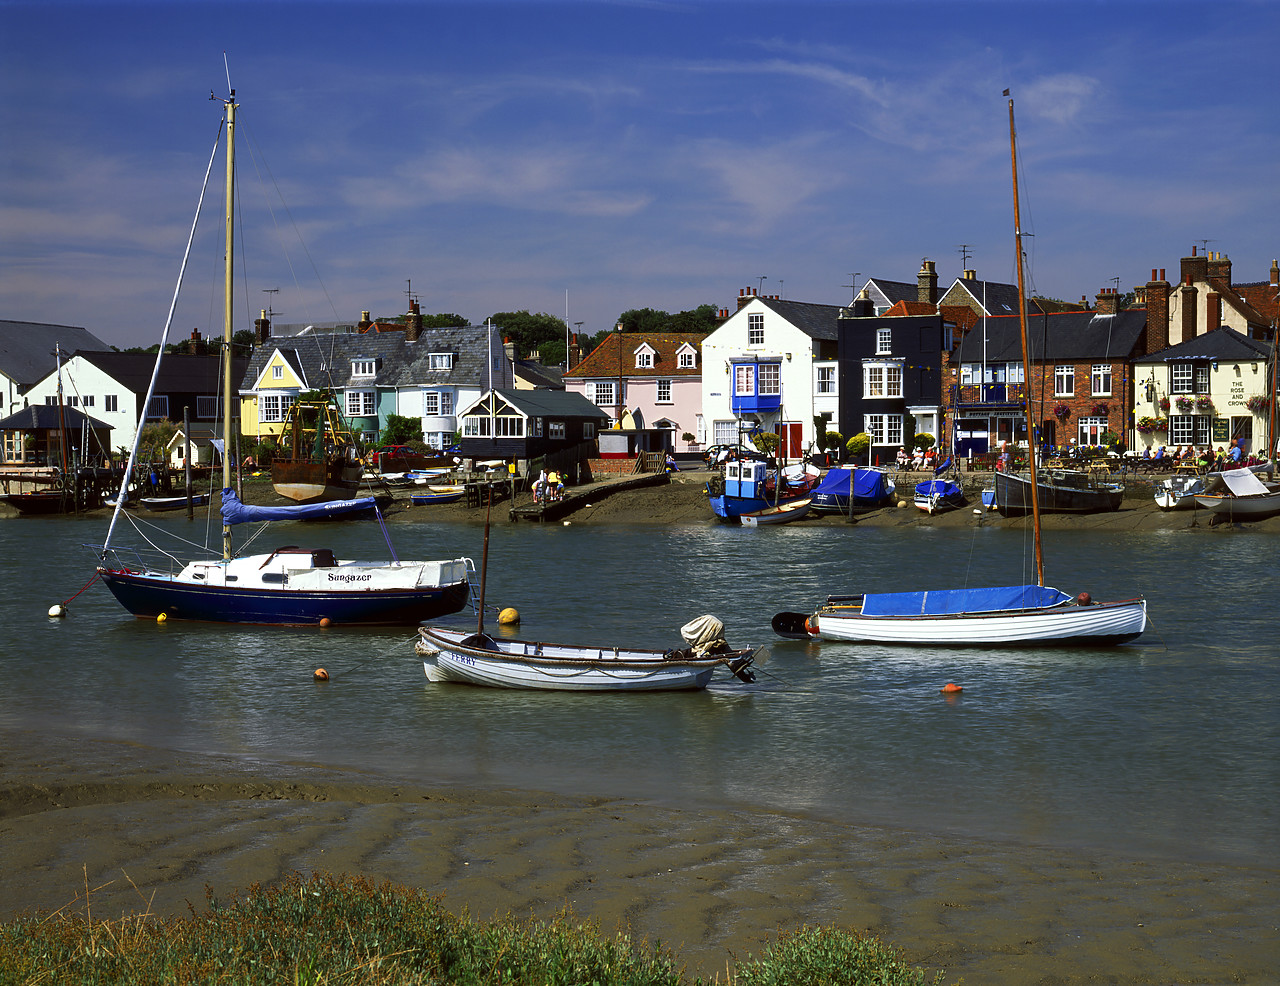 #980820-8 - Wivenhoe on River Colne, Essex, England